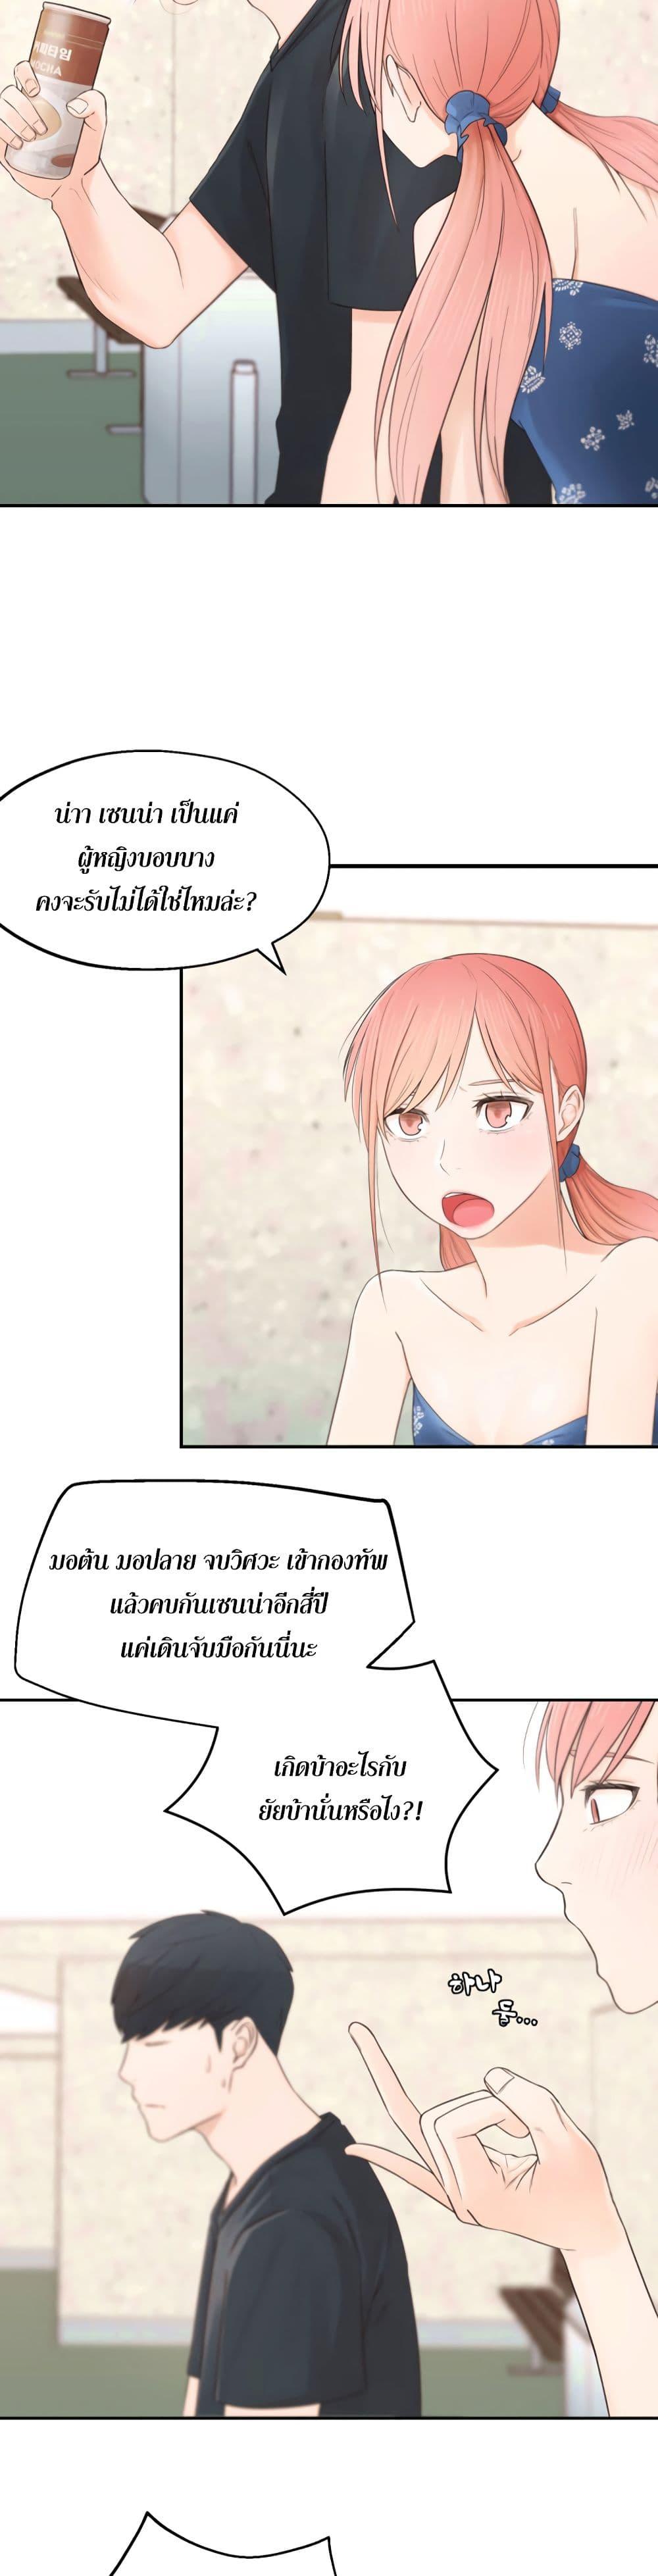 A Knowing Sister 1 ภาพ 27